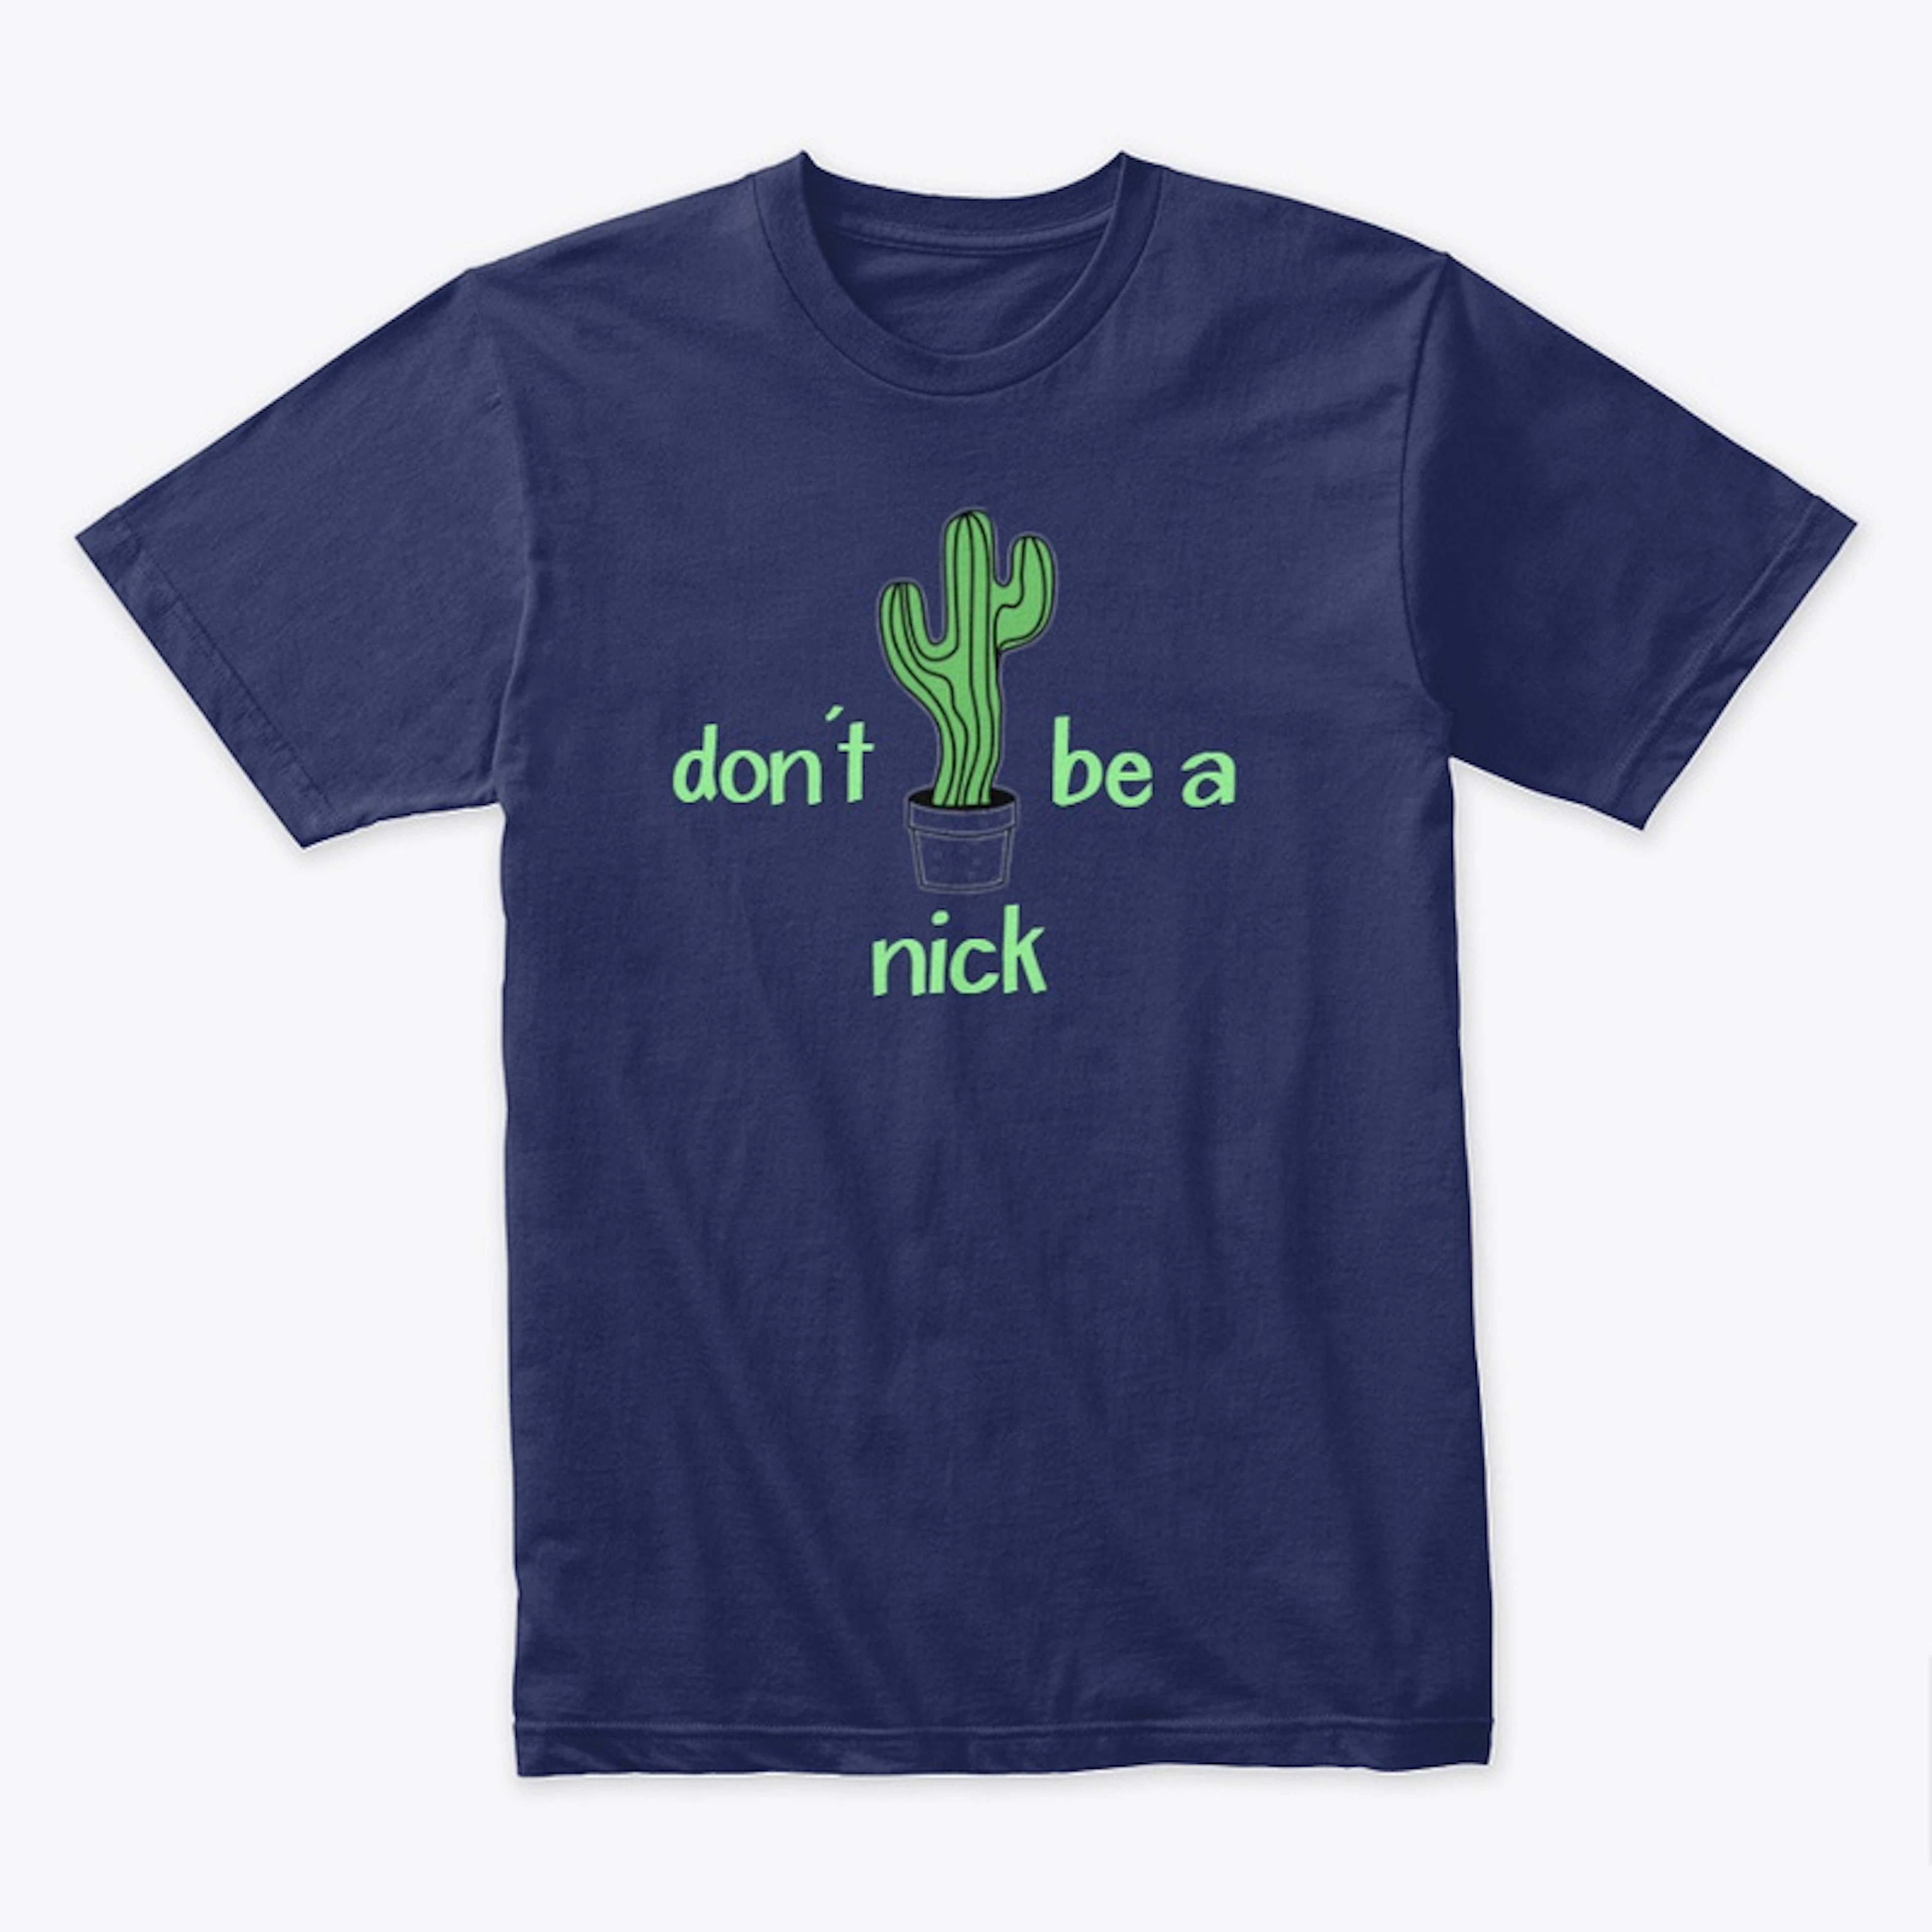 Don't be a nick